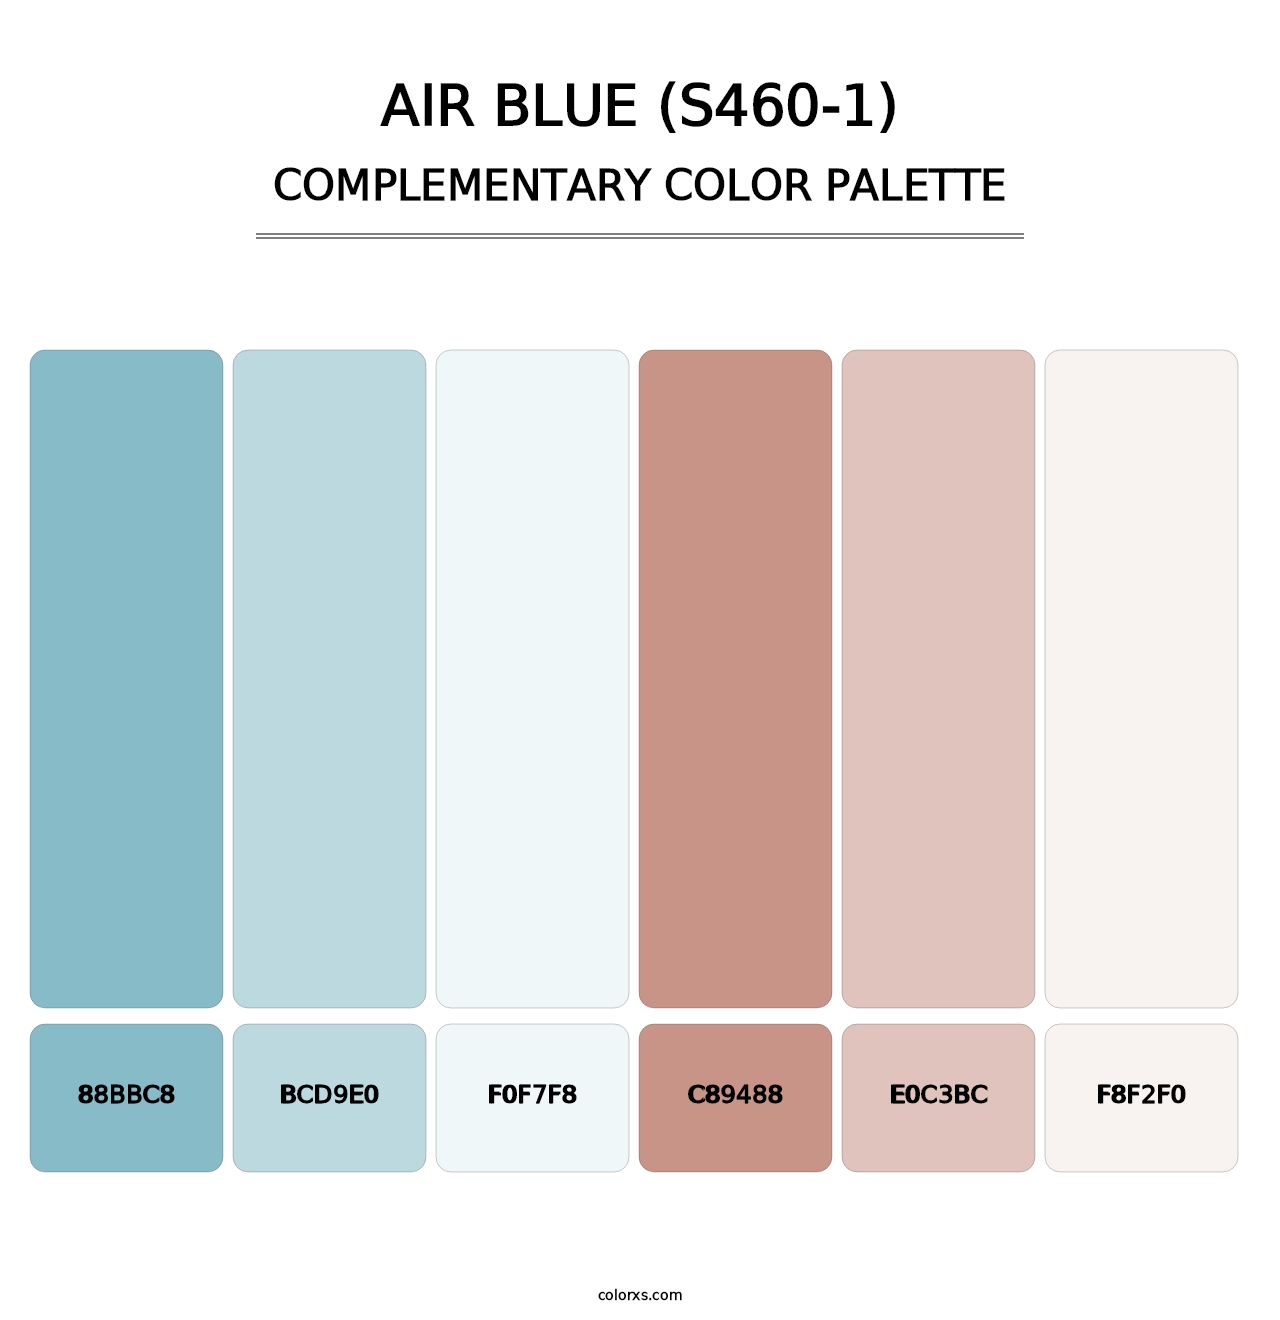 Air Blue (S460-1) - Complementary Color Palette